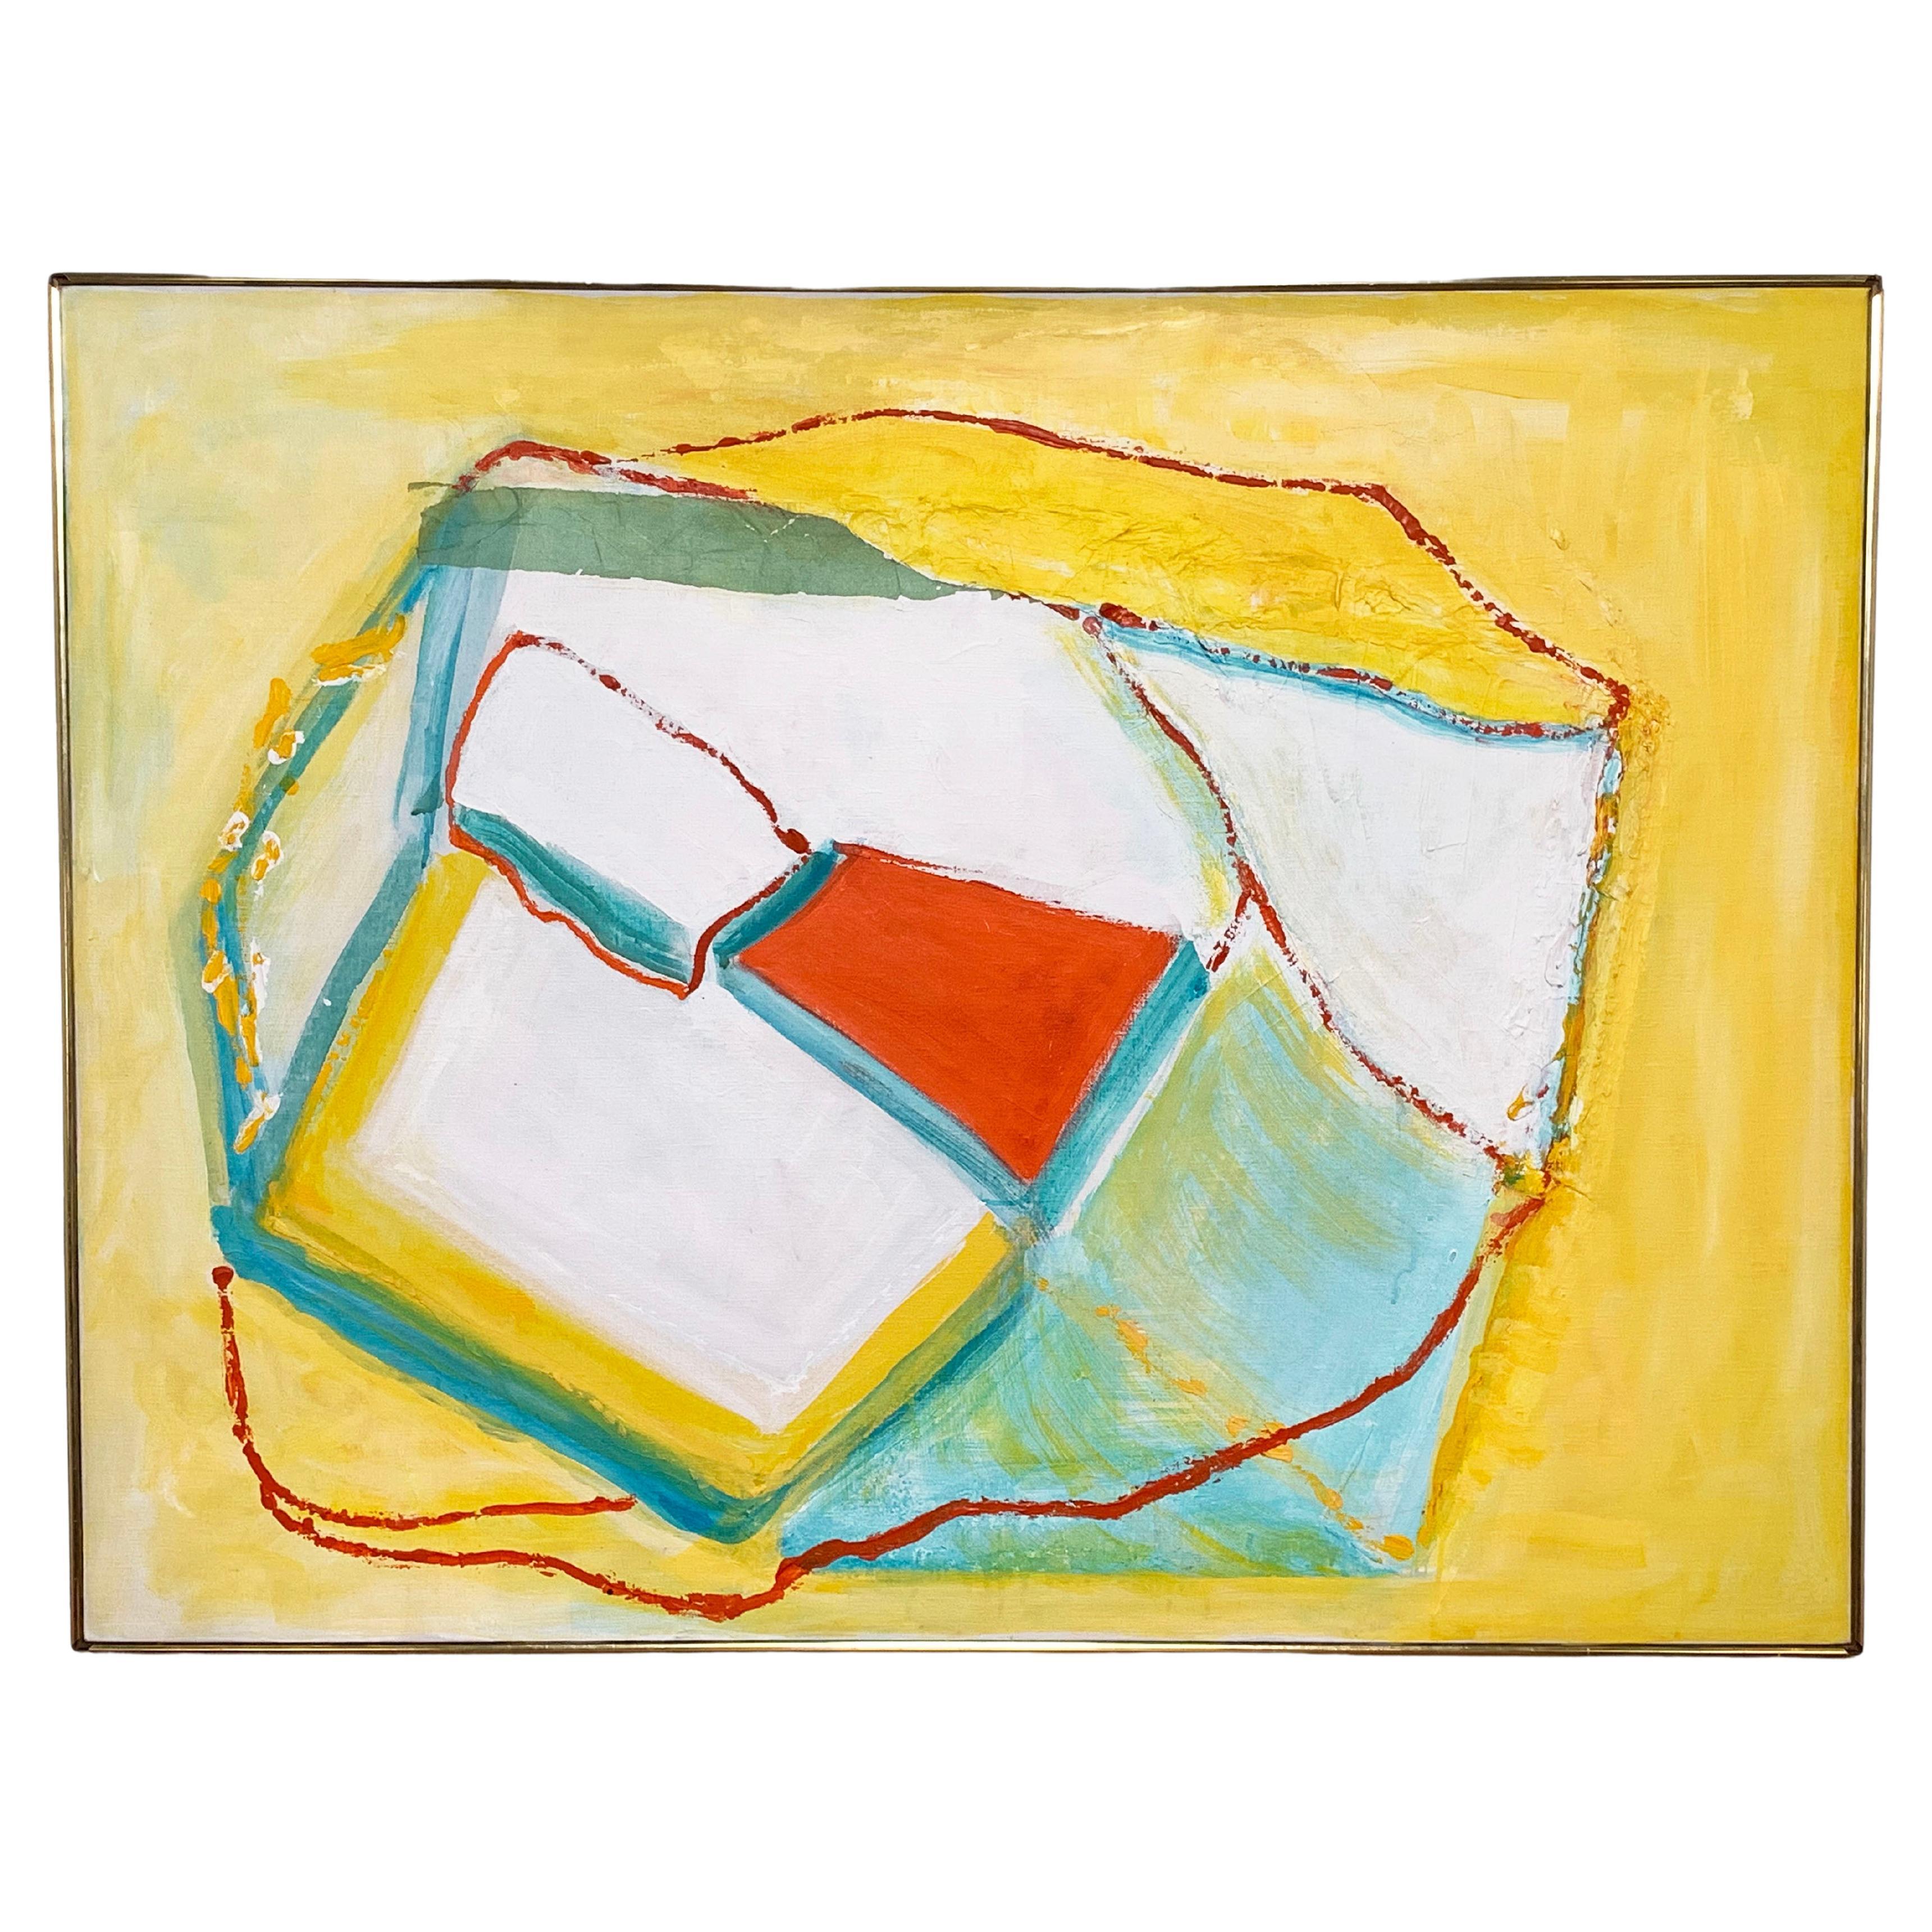 Abstract Modernist Painting Marked "Shozo No. 2" Circa 1960s For Sale